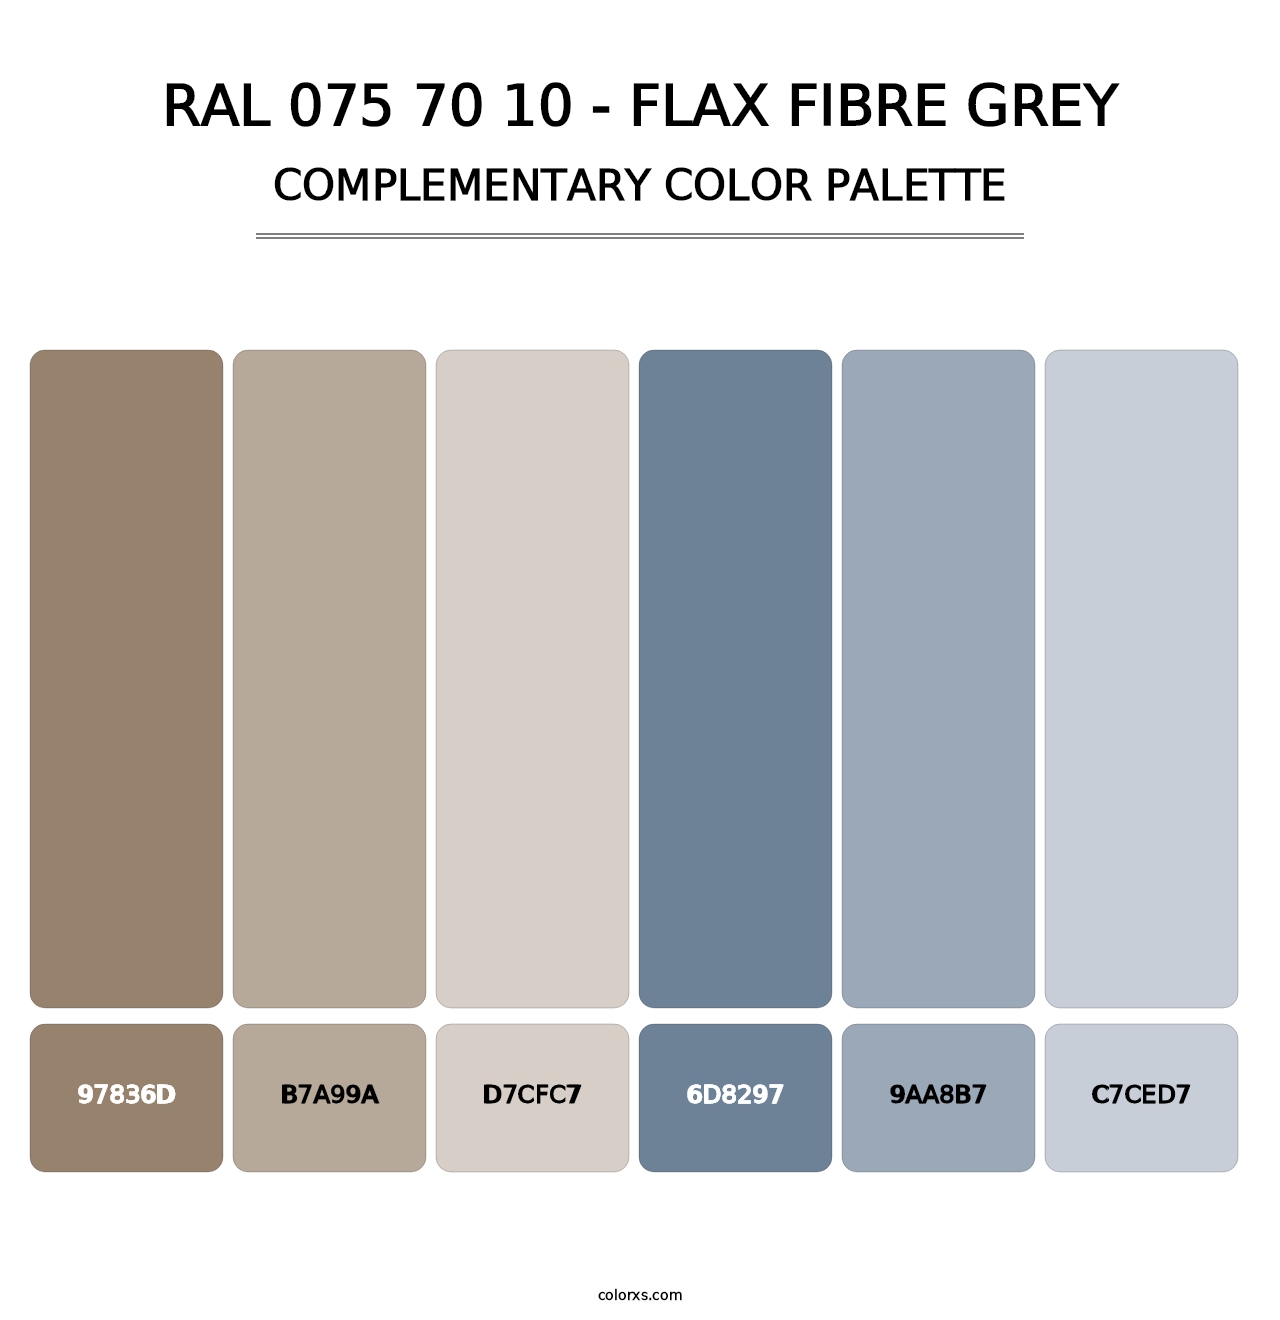 RAL 075 70 10 - Flax Fibre Grey - Complementary Color Palette